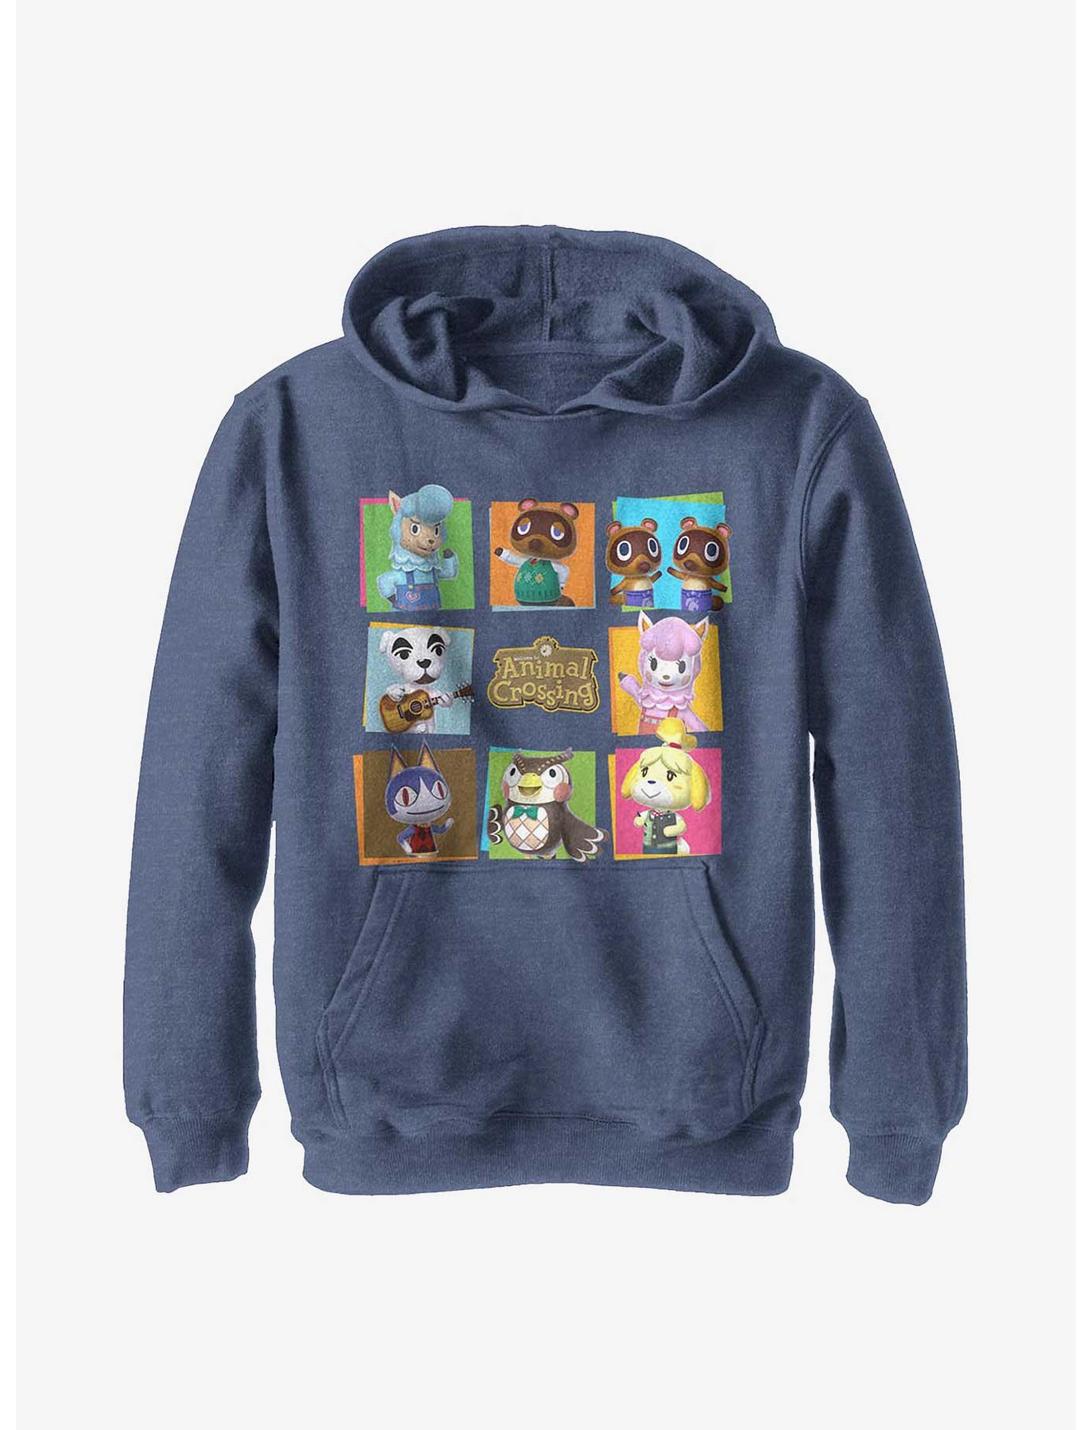 Animal Crossing 8 Character Paste Up Youth Hoodie, NAVY HTR, hi-res